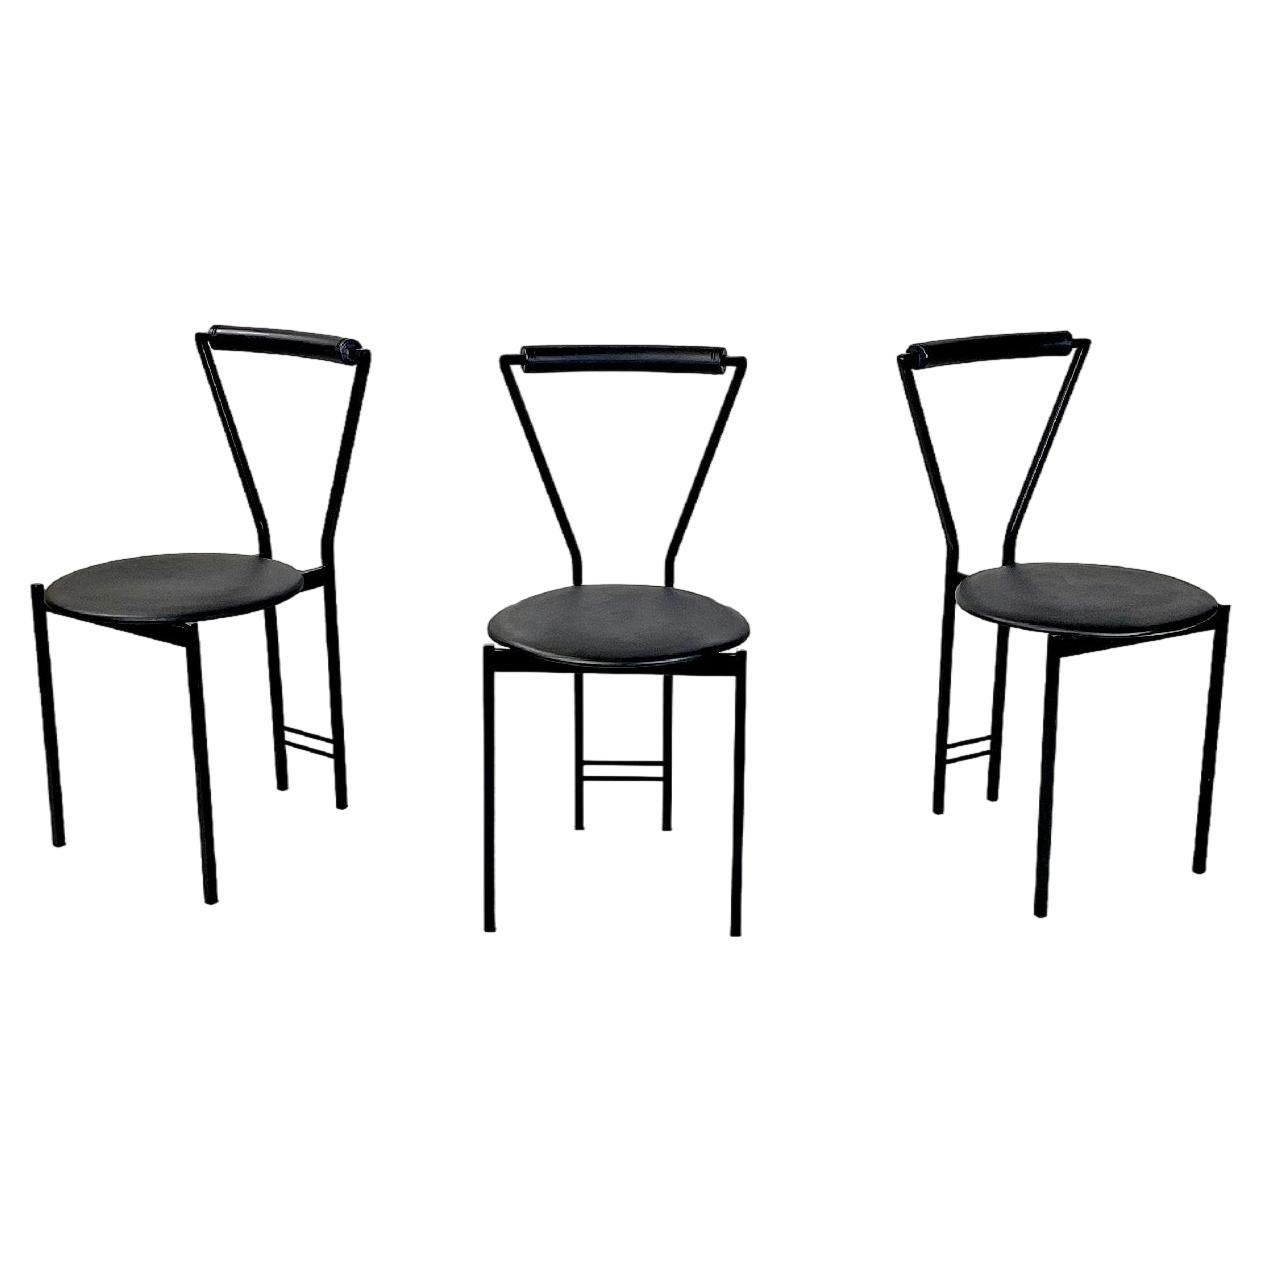 Italian modern chairs in black metal and rubber, 1980s